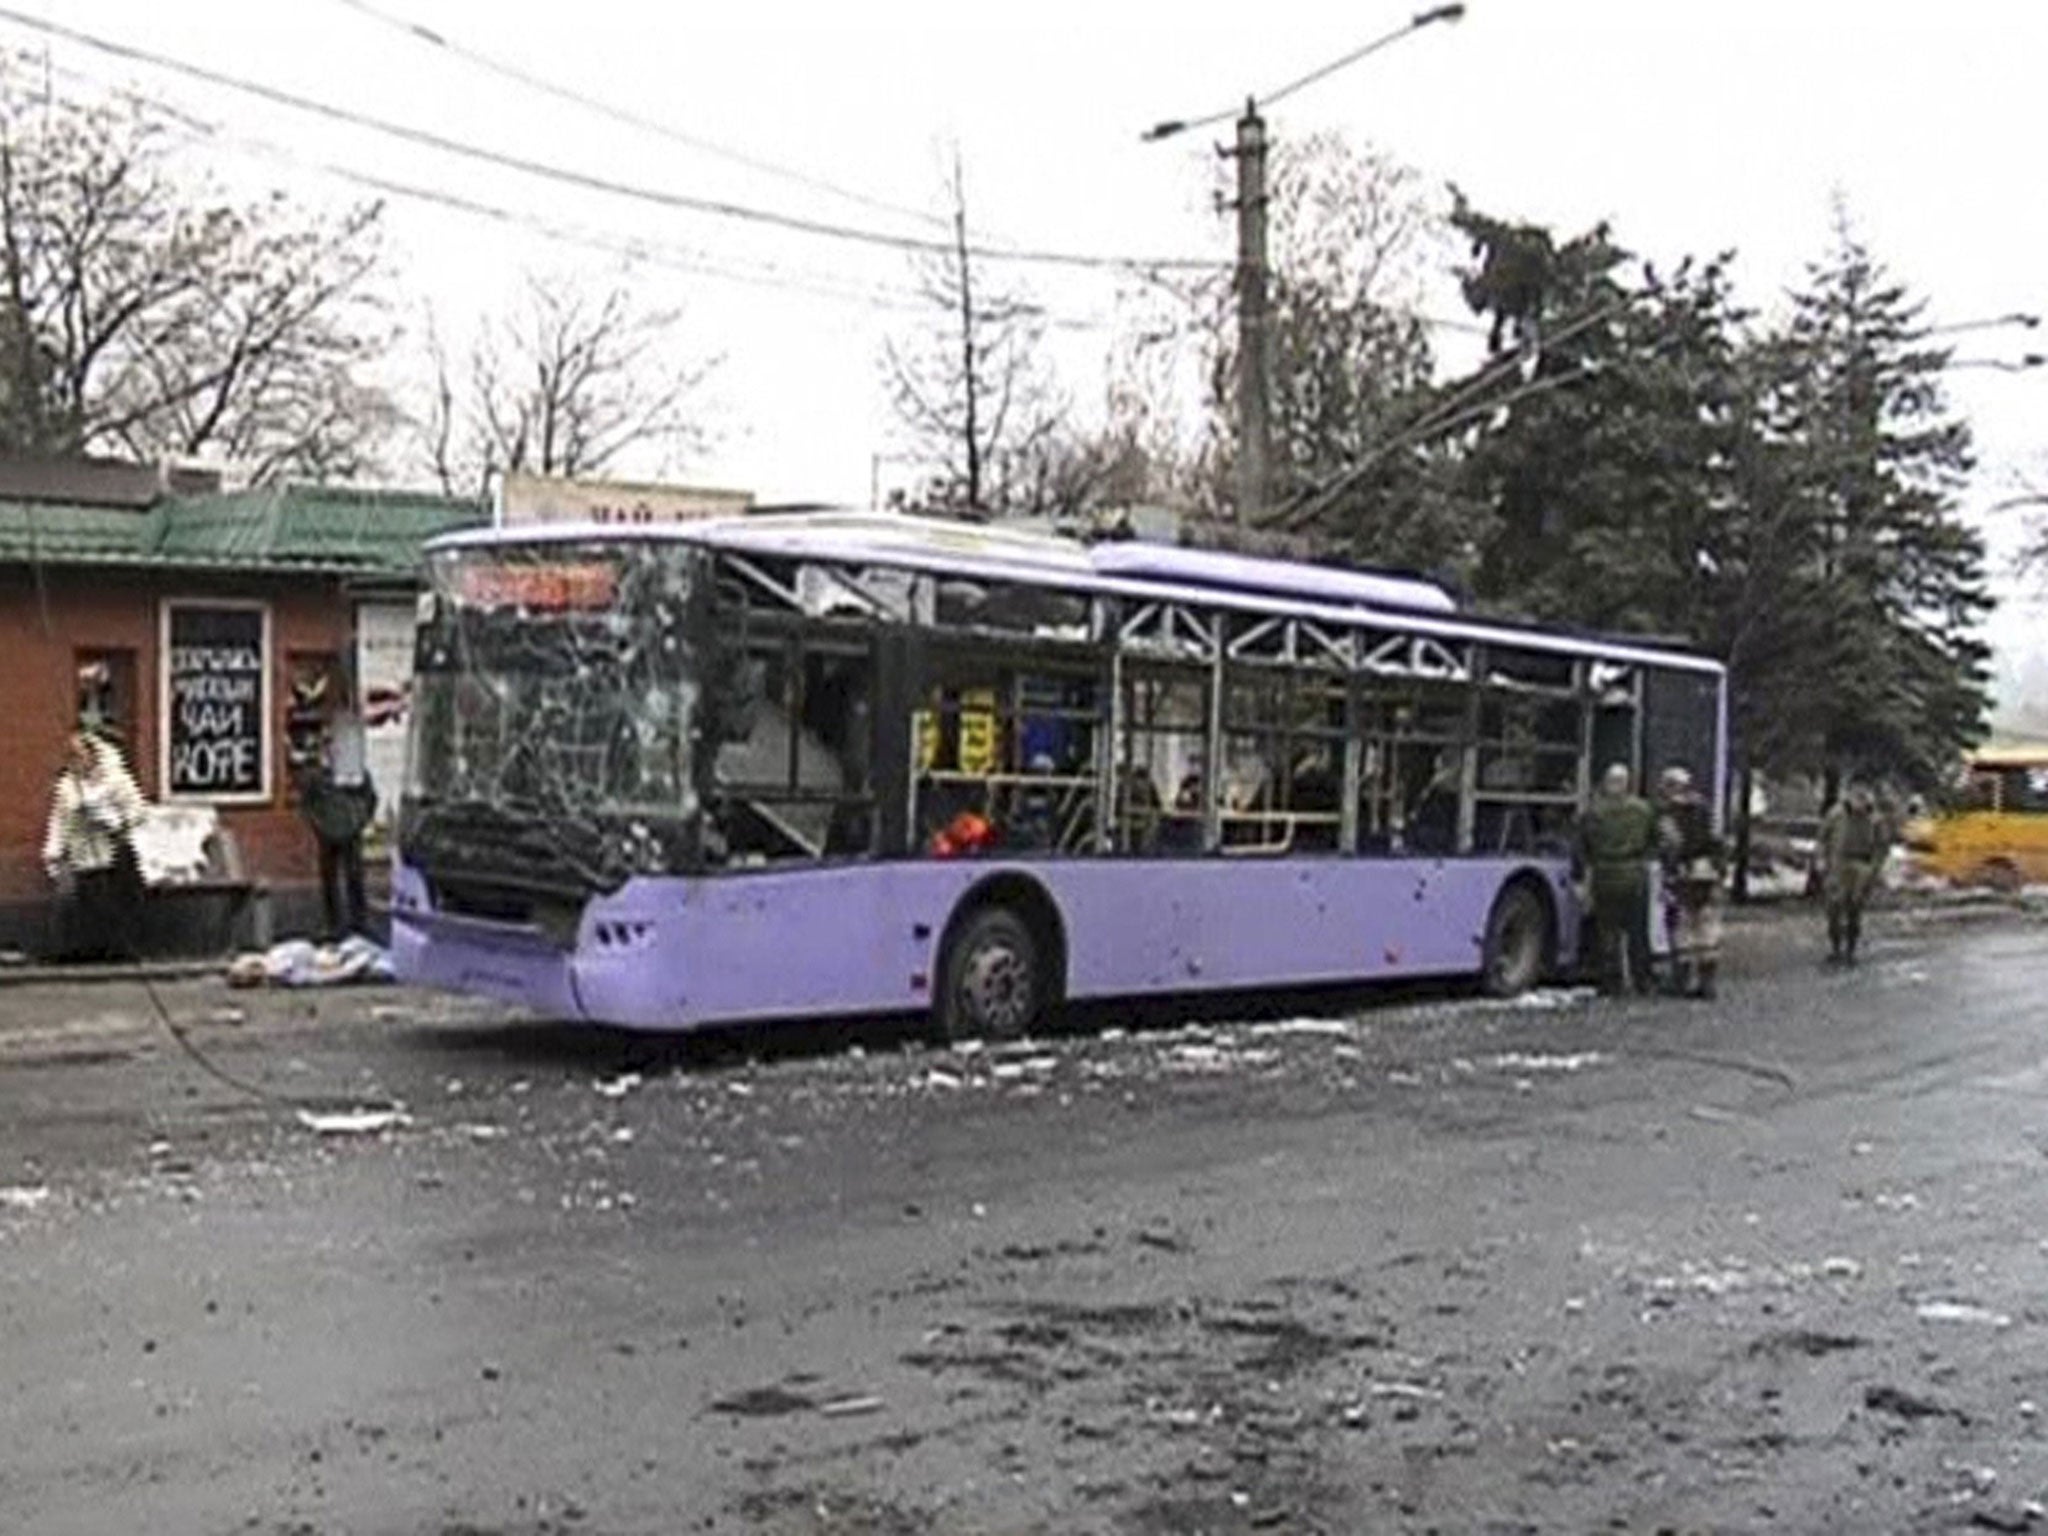 At least seven people have been killed after a shell hit a bus stop in Donetsk in eastern Ukraine